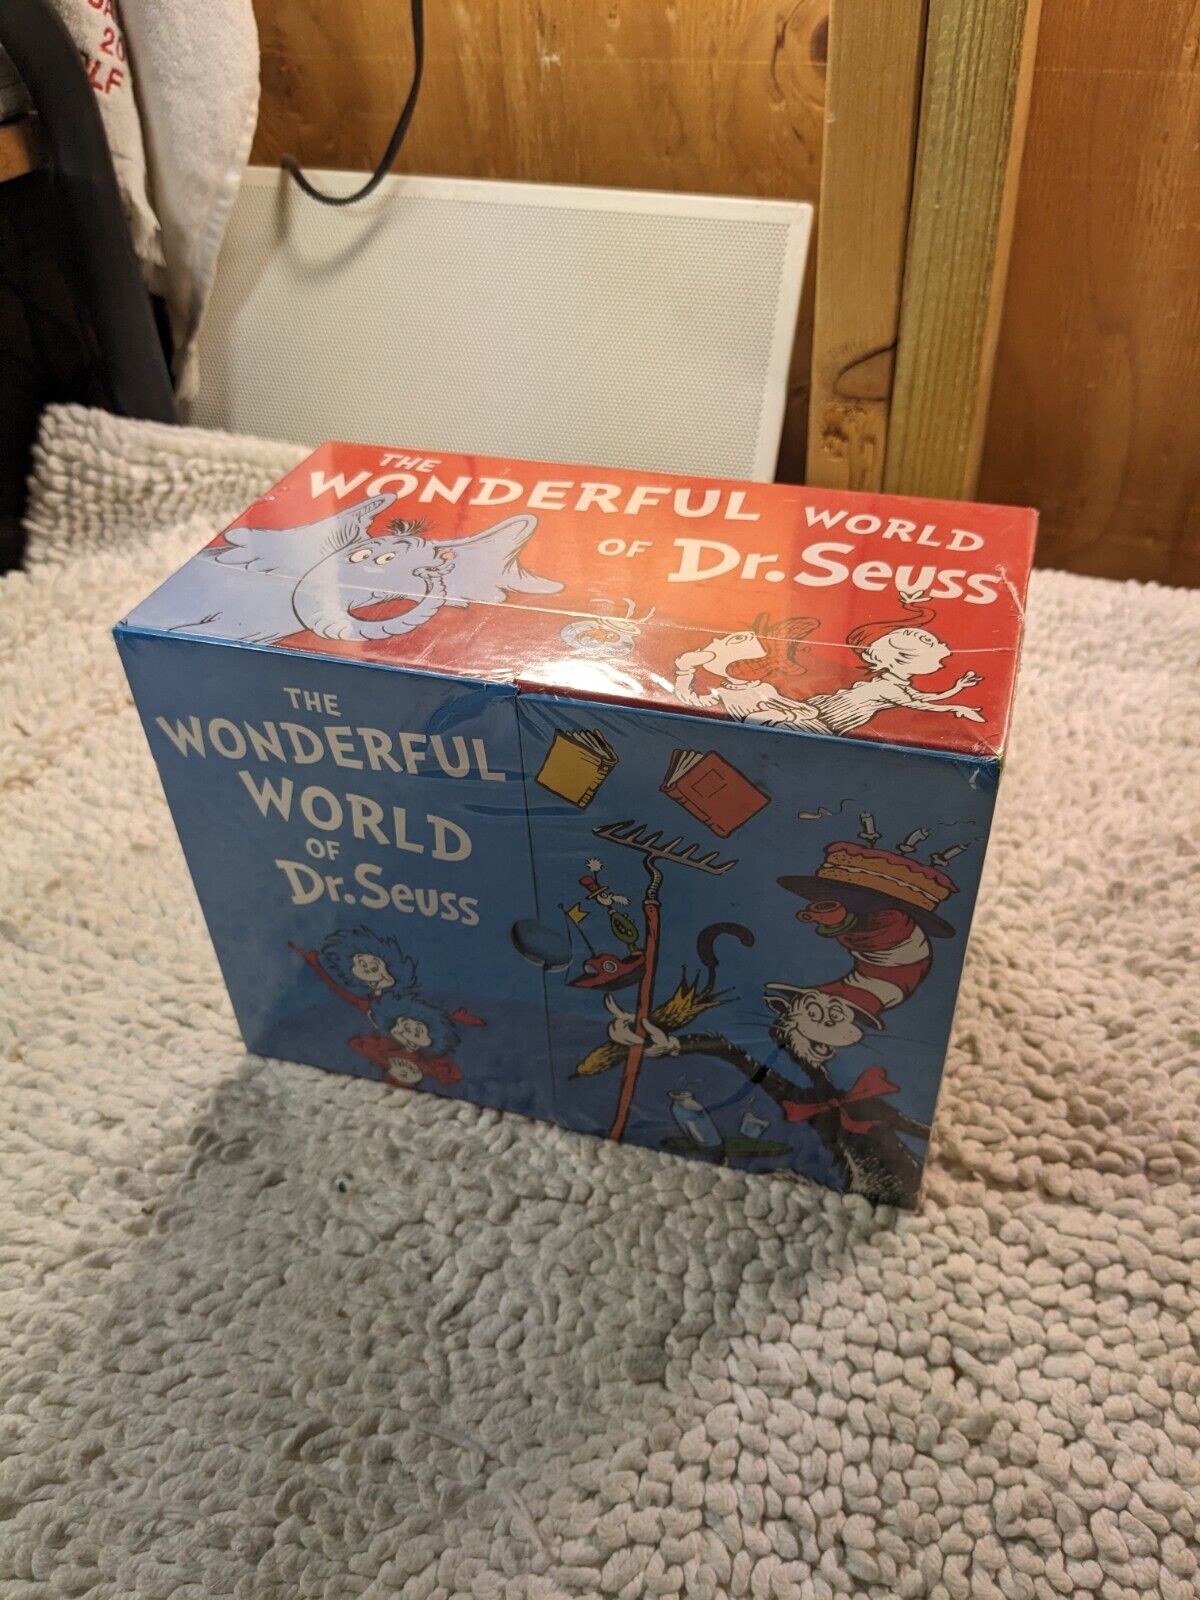 The Wonderful World of Dr. Seuss By Dr. Seuss NEW HARDCOVER BOXSET 2016 RARE